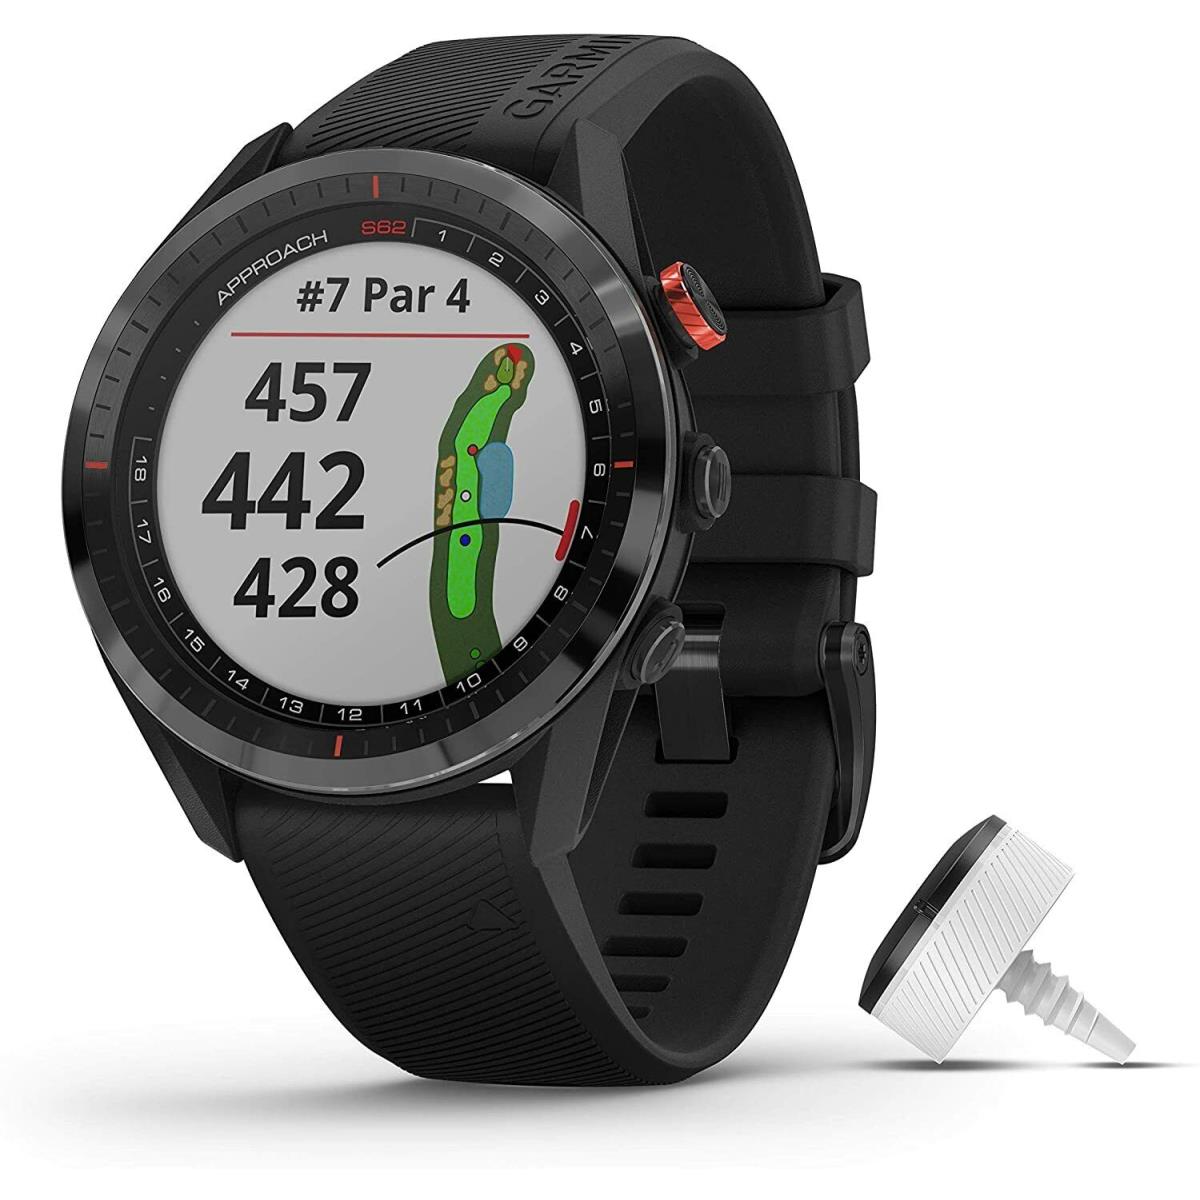 Garmin Approach S62 Bundle Premium Golf Gps Watch Mapping and Full Color Screen - Black